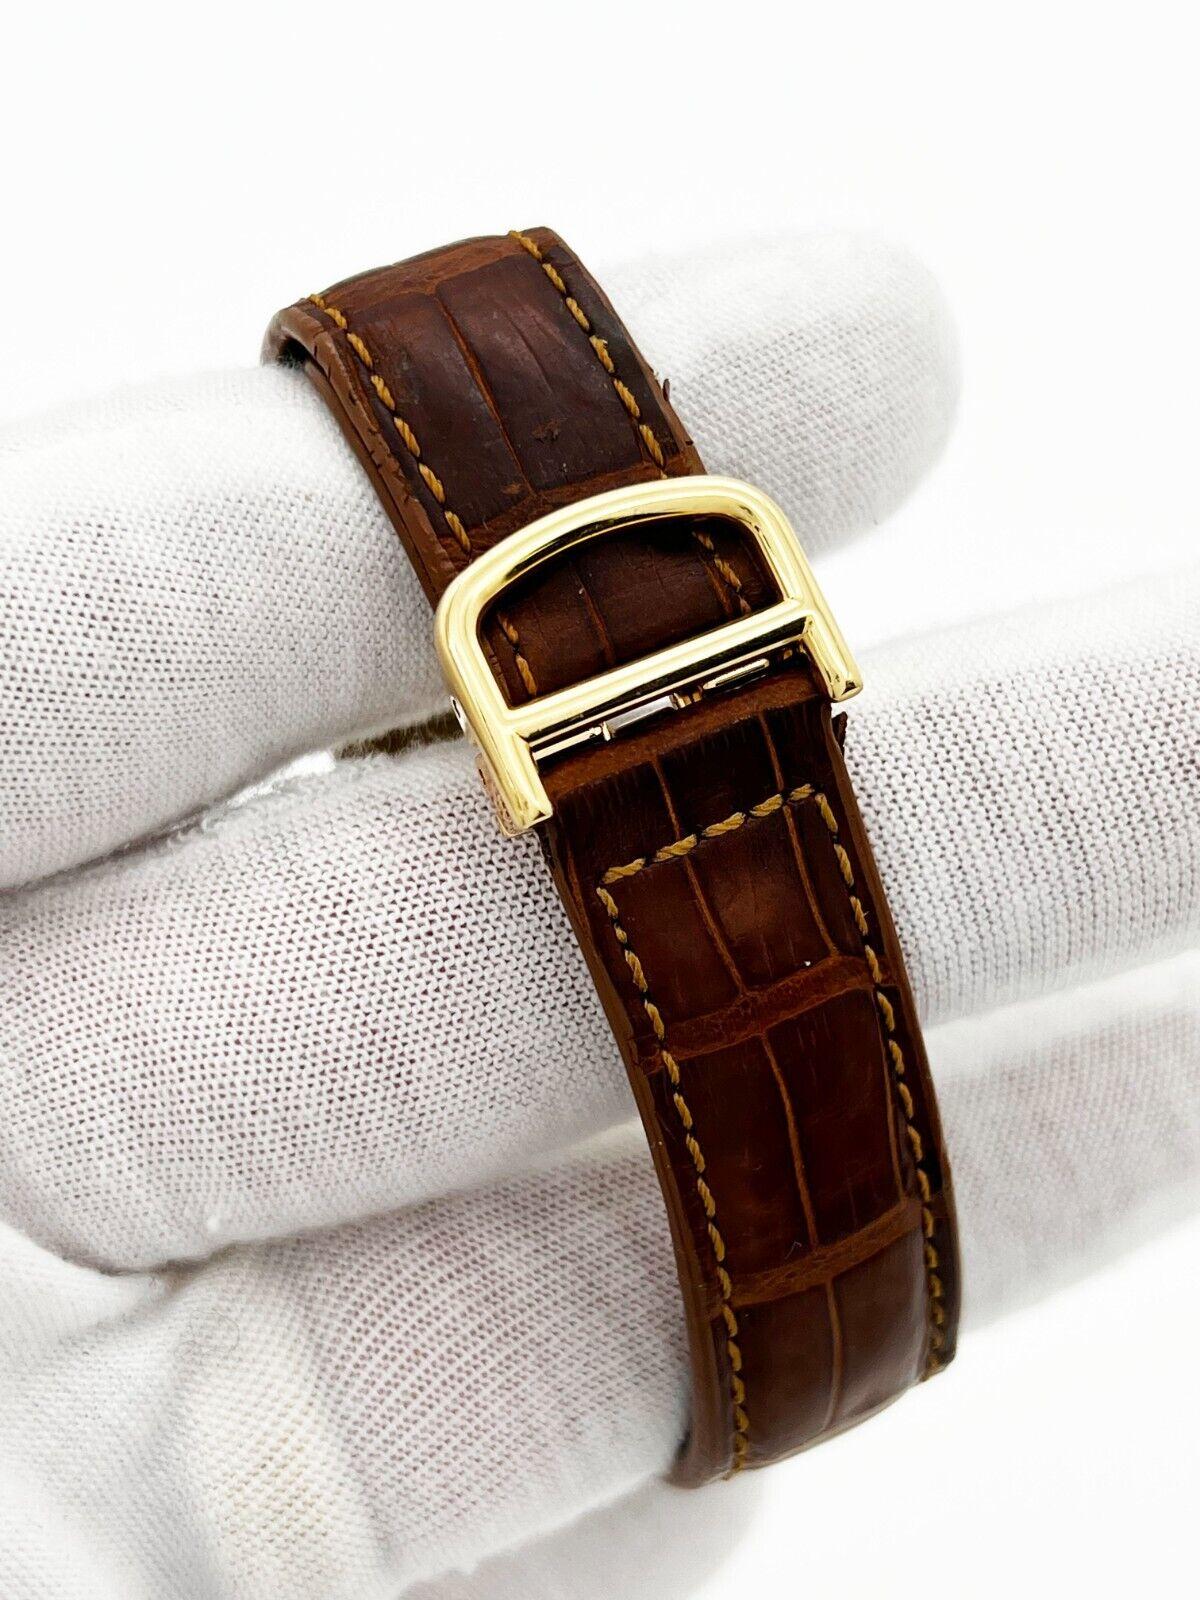 Cartier Pasha Ref 1353 Chronograph 18K Yellow Gold 35mm Leather Strap 1